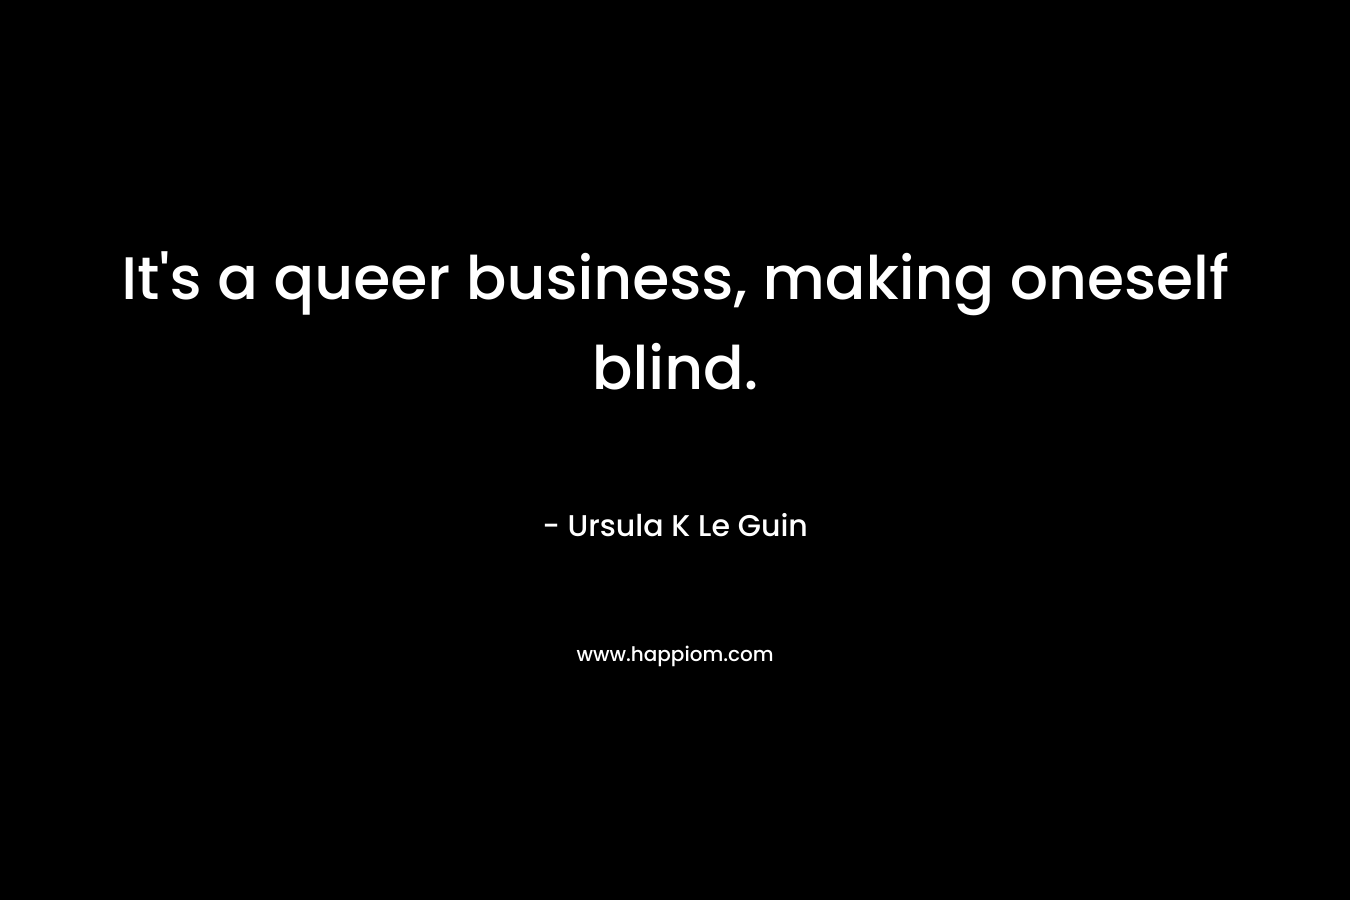 It's a queer business, making oneself blind.